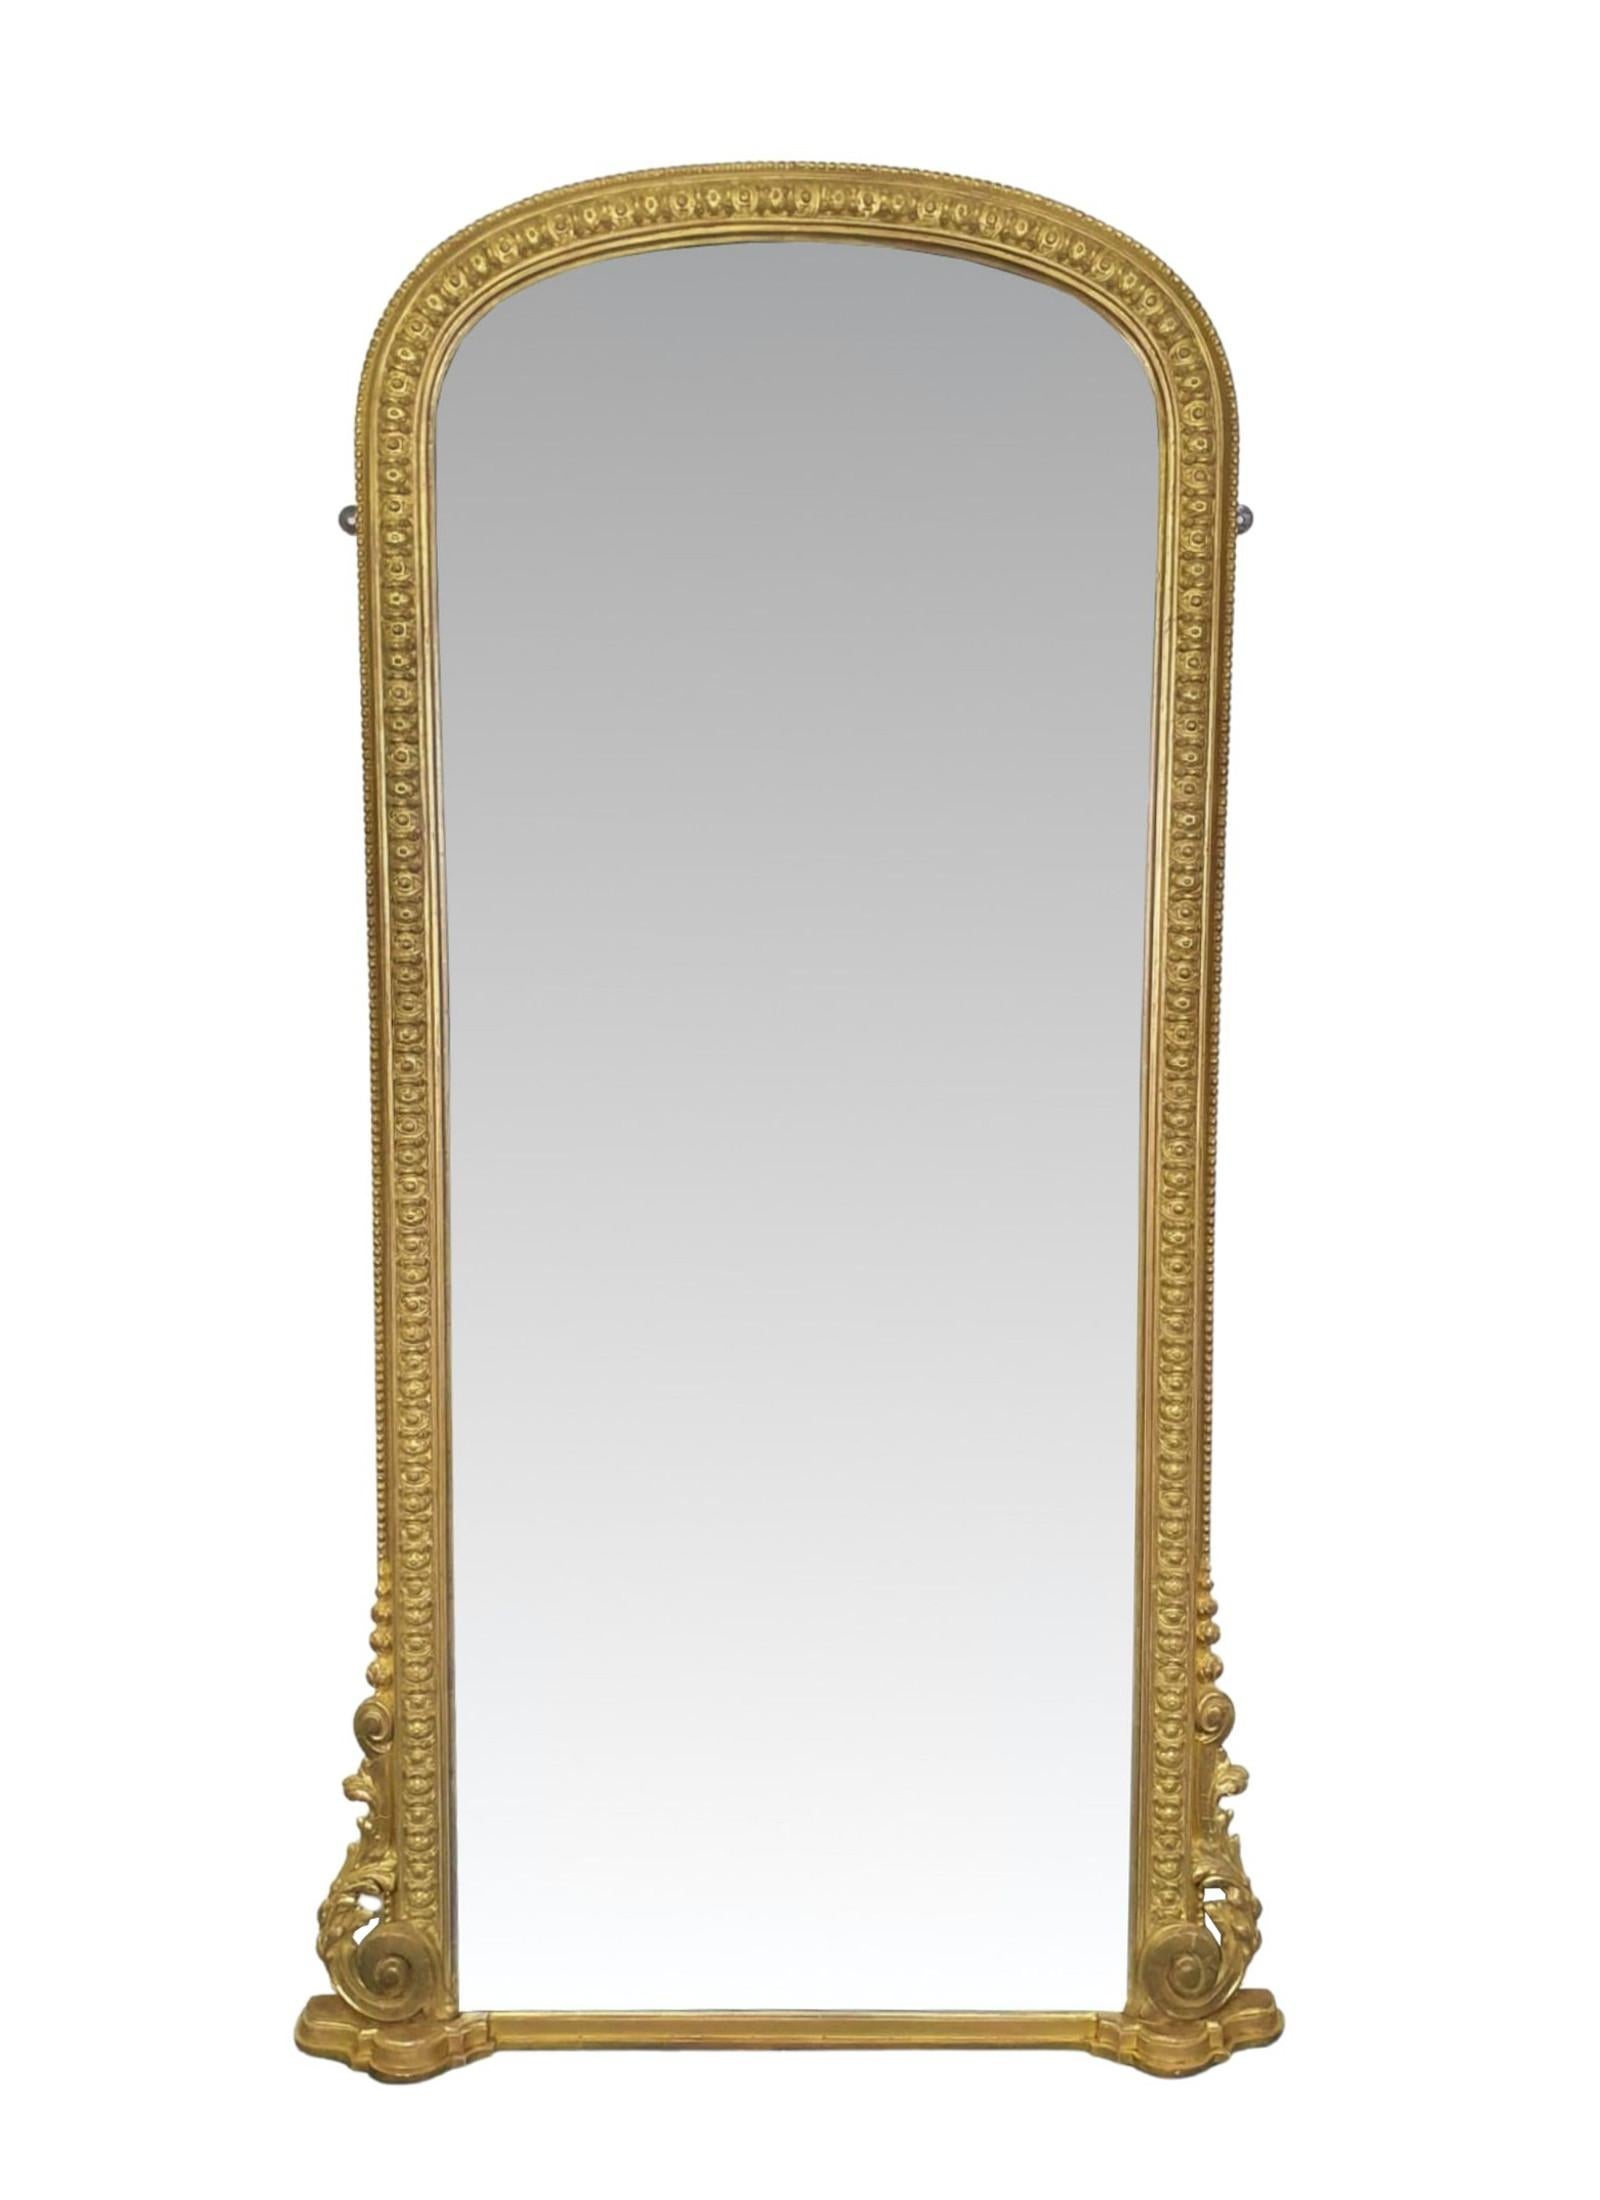 English Gorgeous 19th Century Archtop Tall Pier or Dressing Mirror For Sale